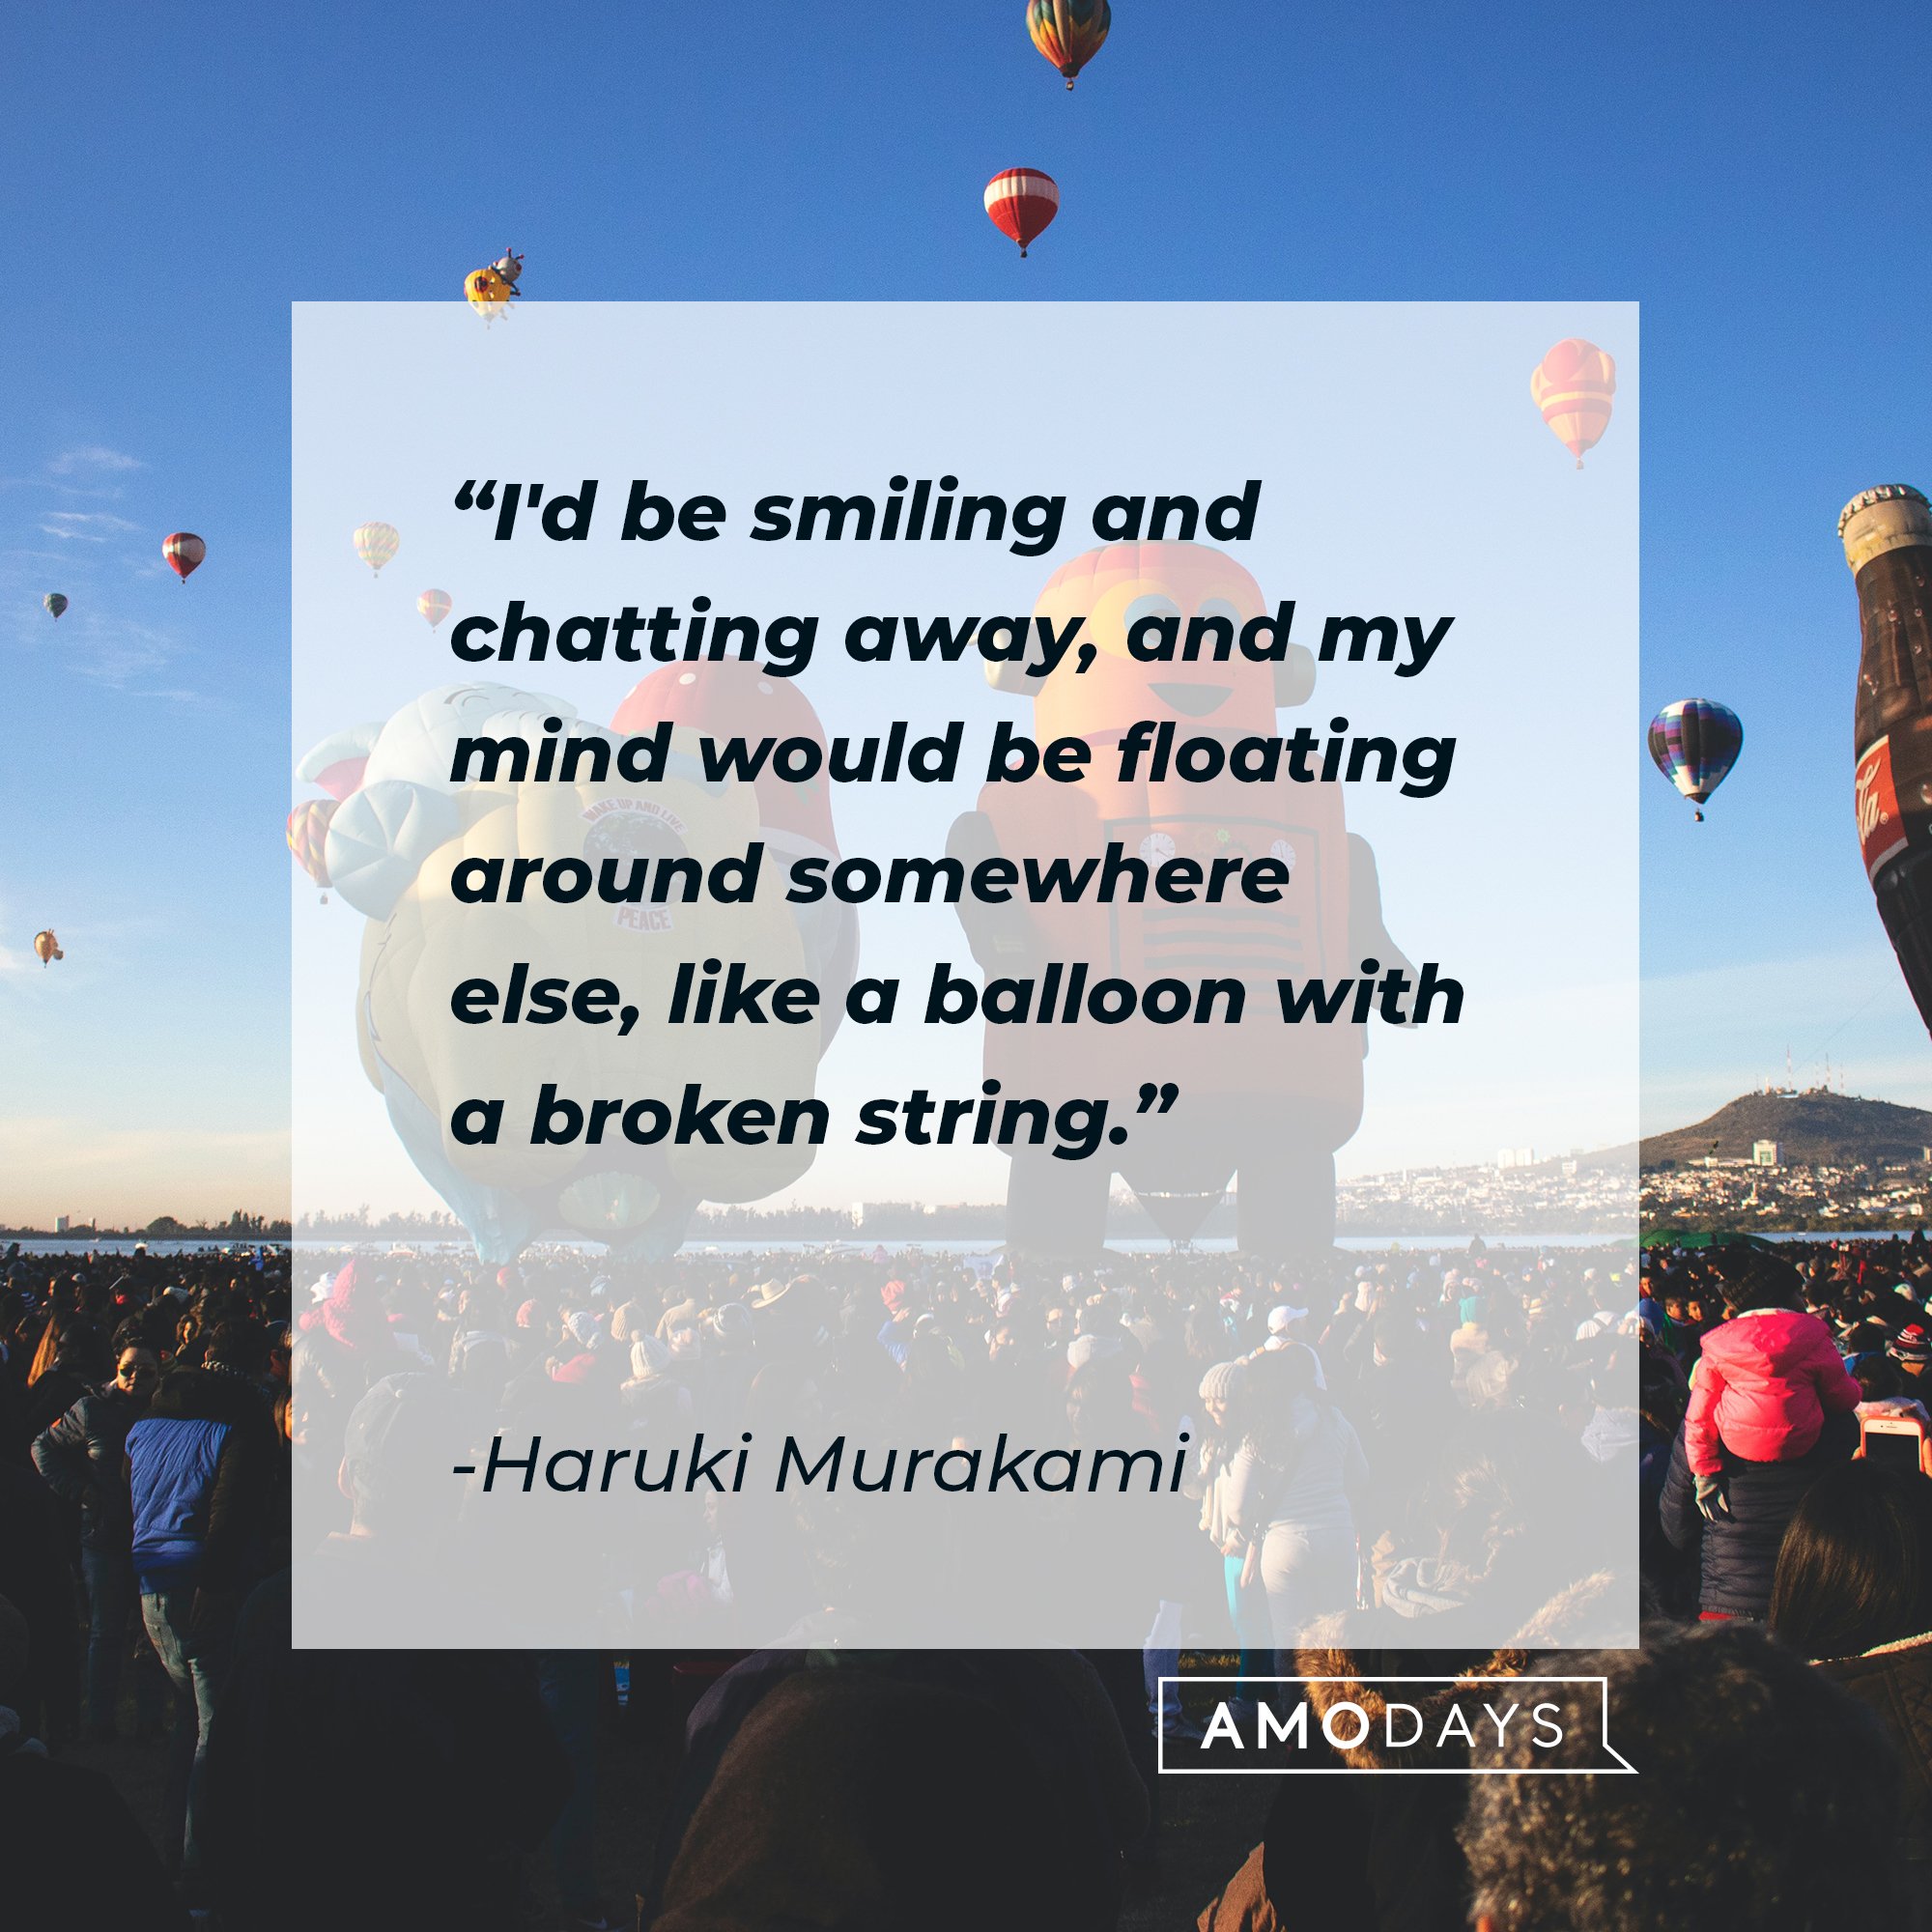 Haruki Murakami’s quote: "I'd be smiling and chatting away, and my mind would be floating around somewhere else, like a balloon with a broken string." | Image: AmoDays 